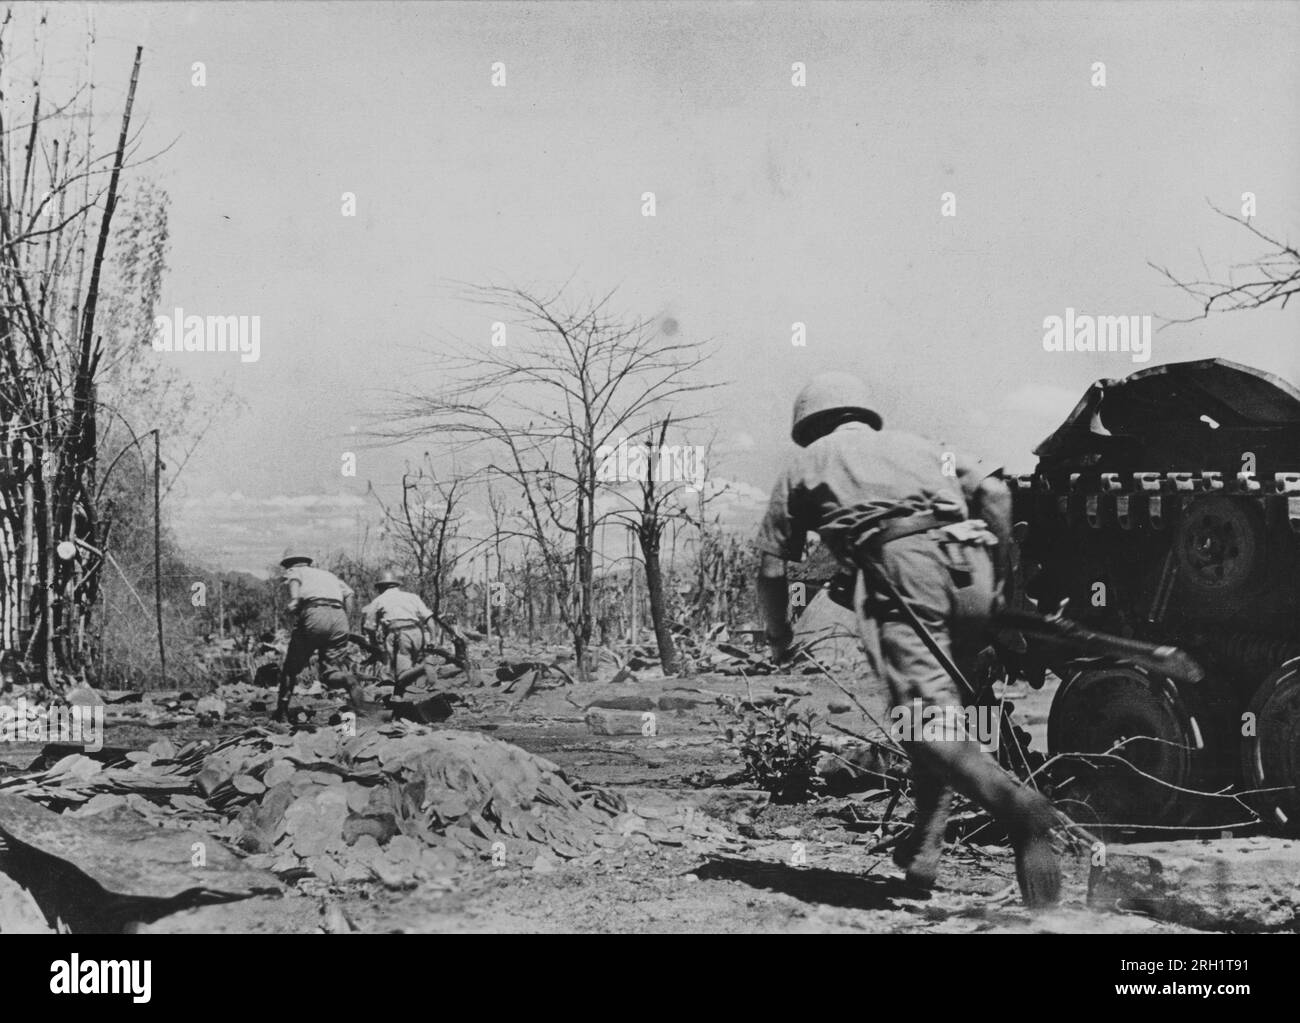 Invasion of the Philippines, December 1941 – May 1942. Imperial Japanese Army infantrymen supported by armor move to seize control of Balanga during the Battle of Bataan, January 7 – April 9 1942. Stock Photo